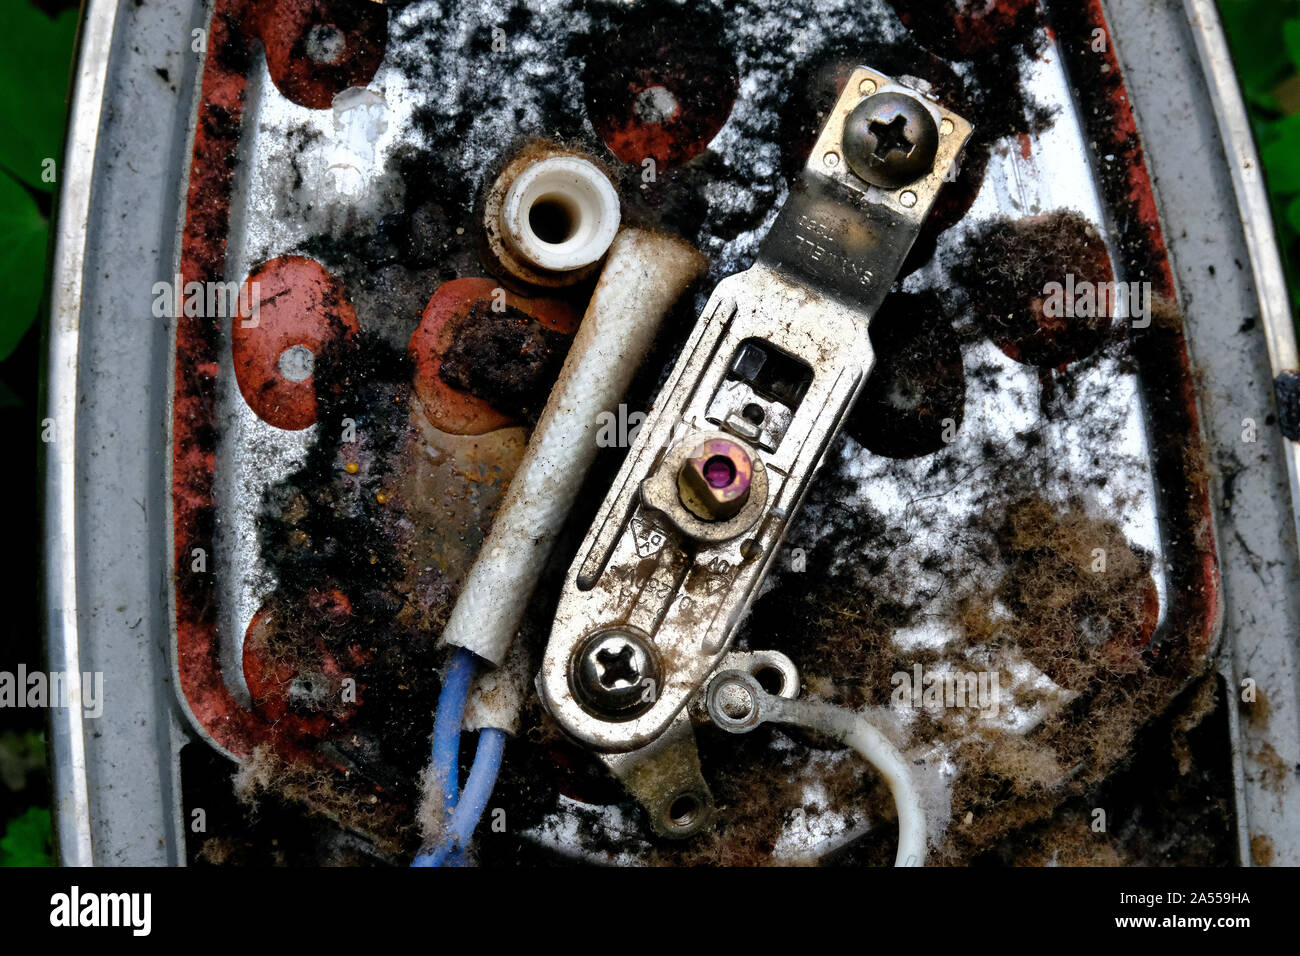 Damage to inside of domestic steam iron due to short circuit from water leak. Stock Photo